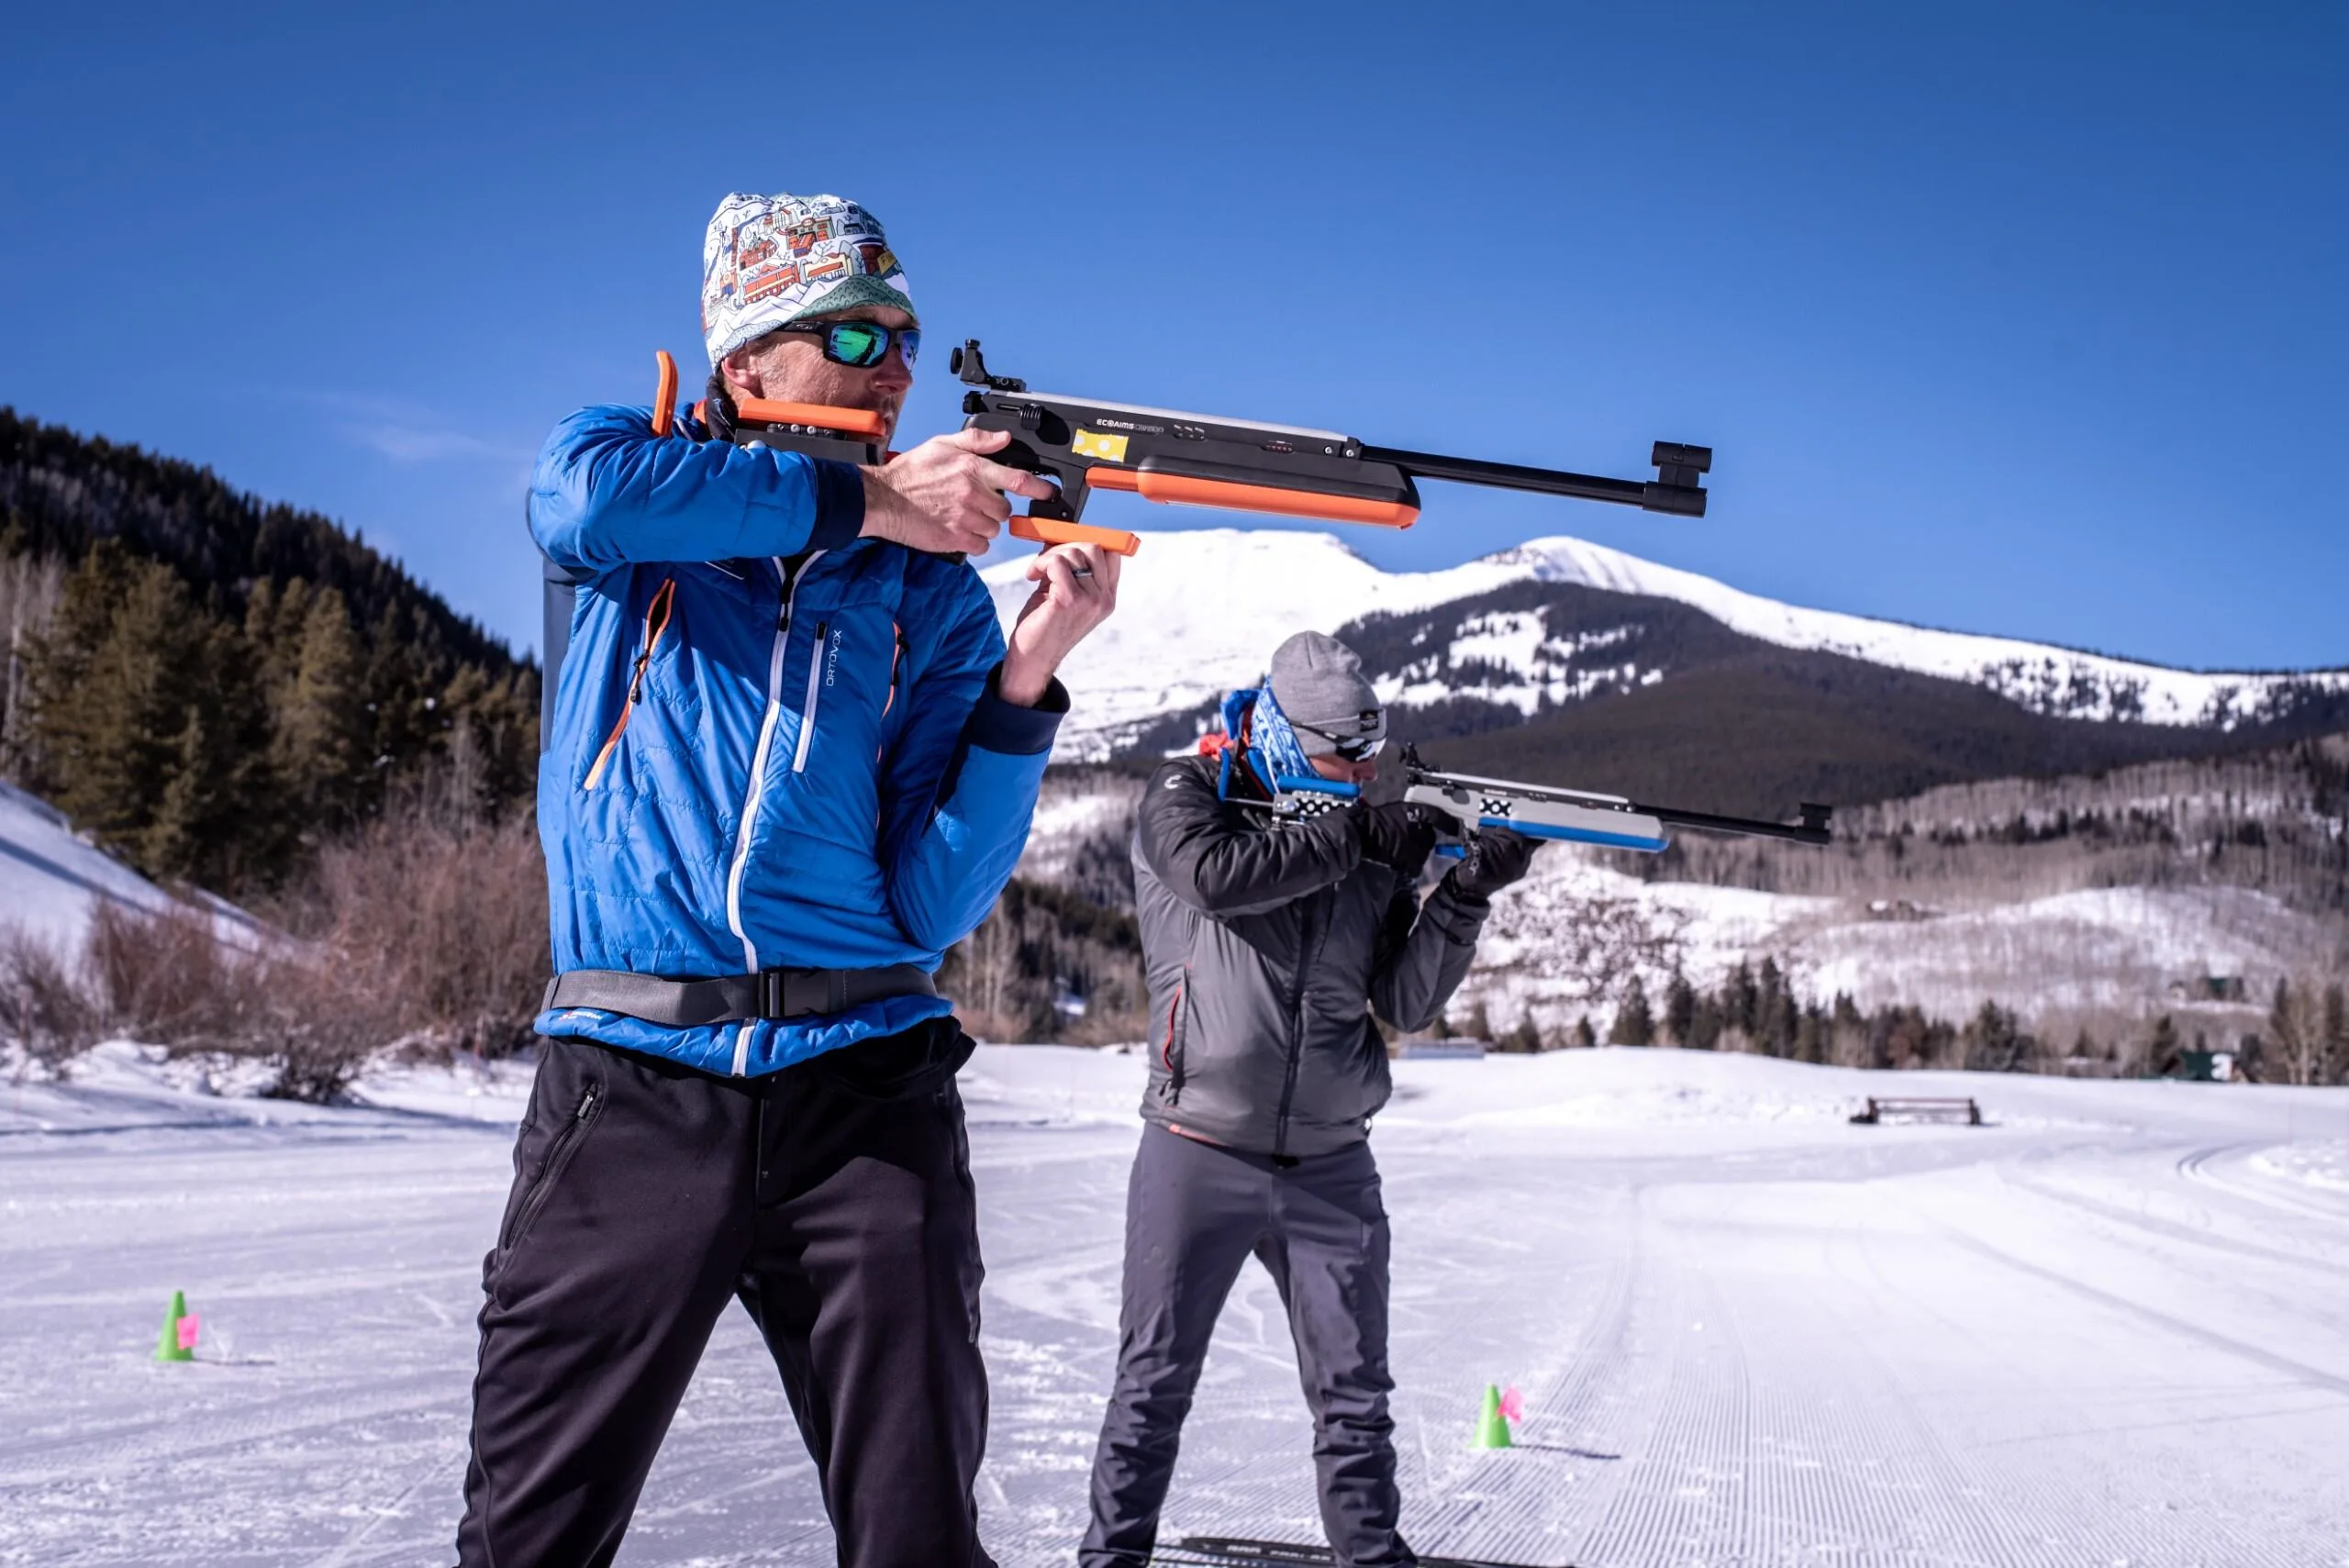 Adults practice biathlon skills with infrared rifles